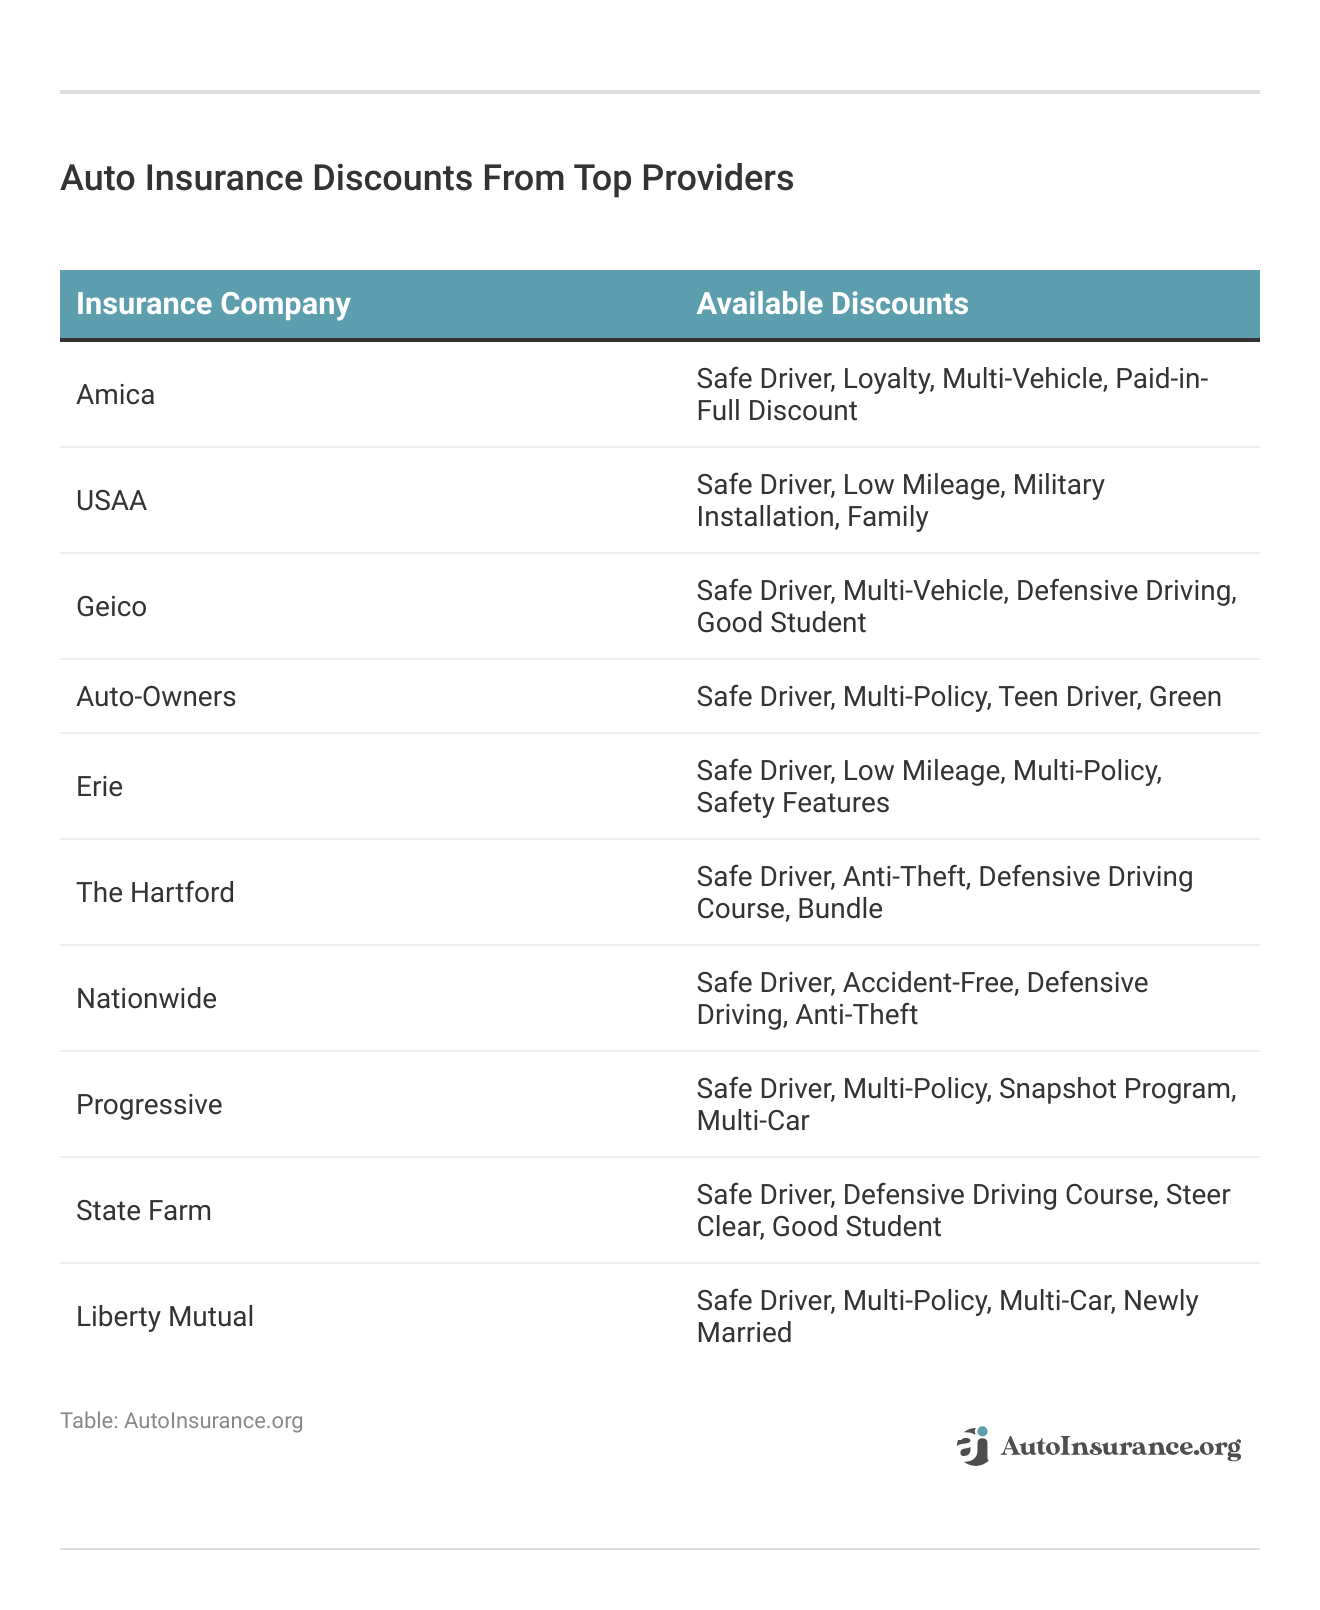 <h3>Auto Insurance Discounts From Top Providers</h3>